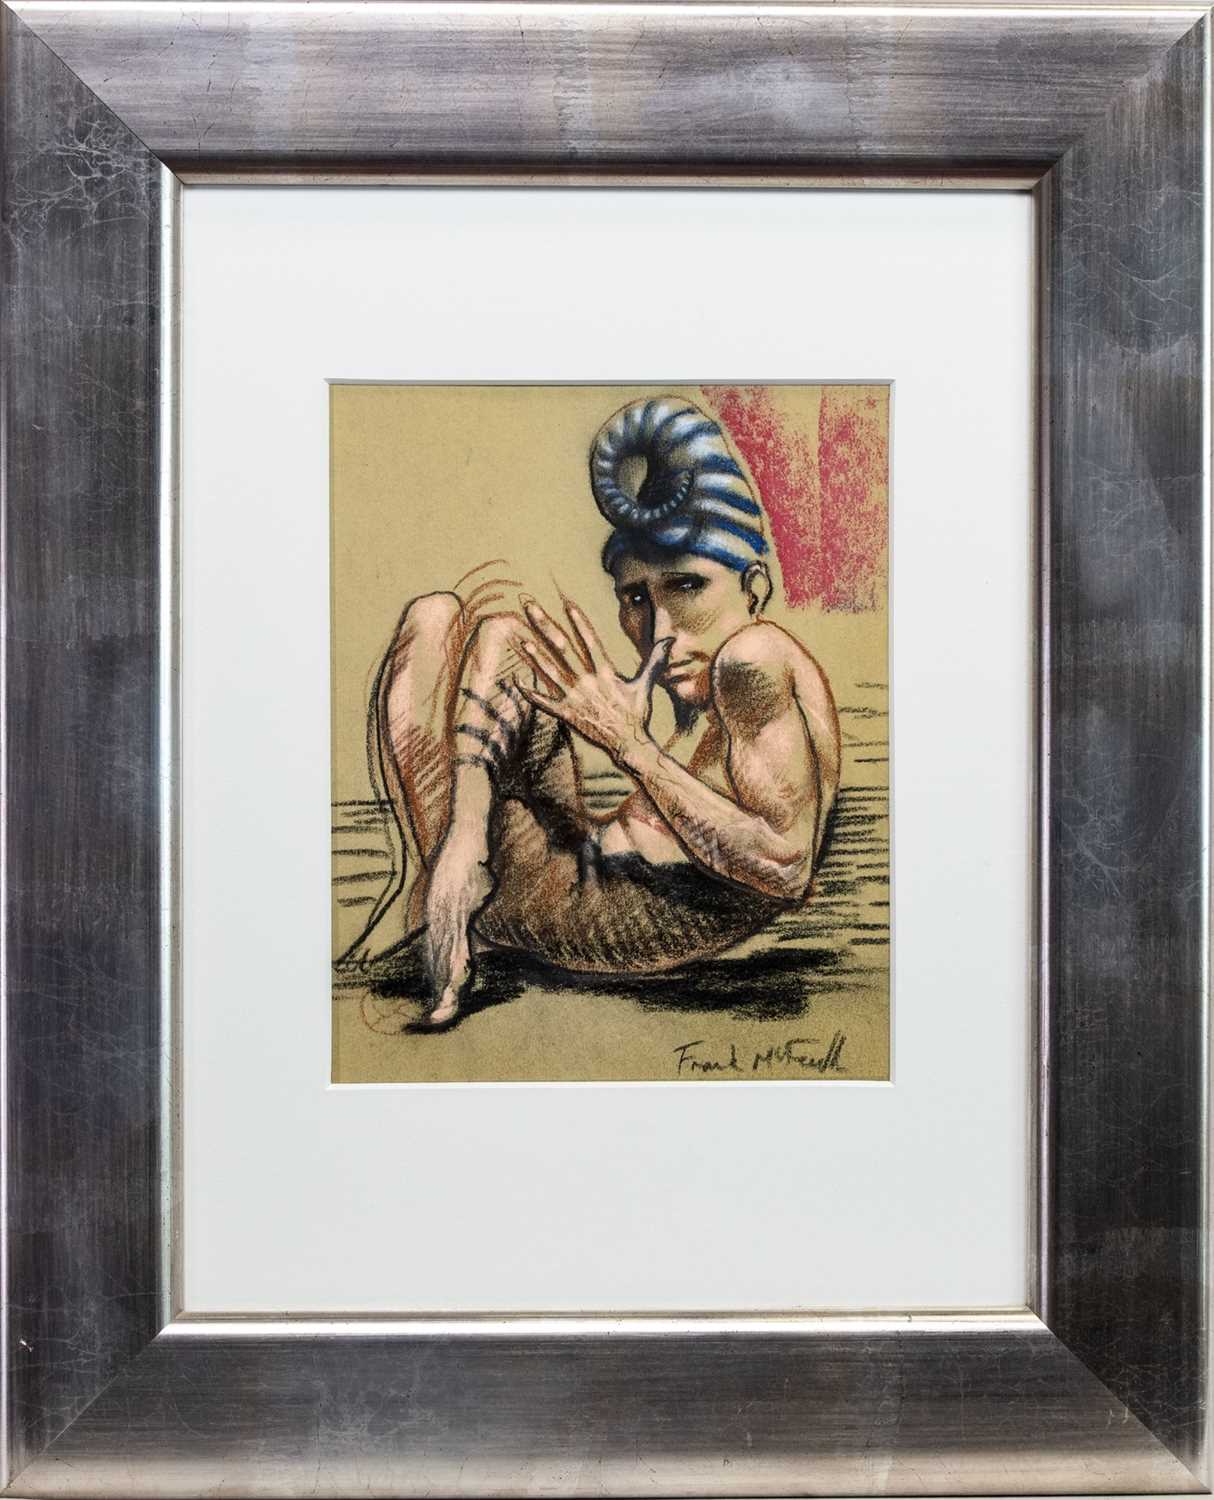 Lot 54 - CURLED UP, A PASTEL BY FRANK MCFADDEN